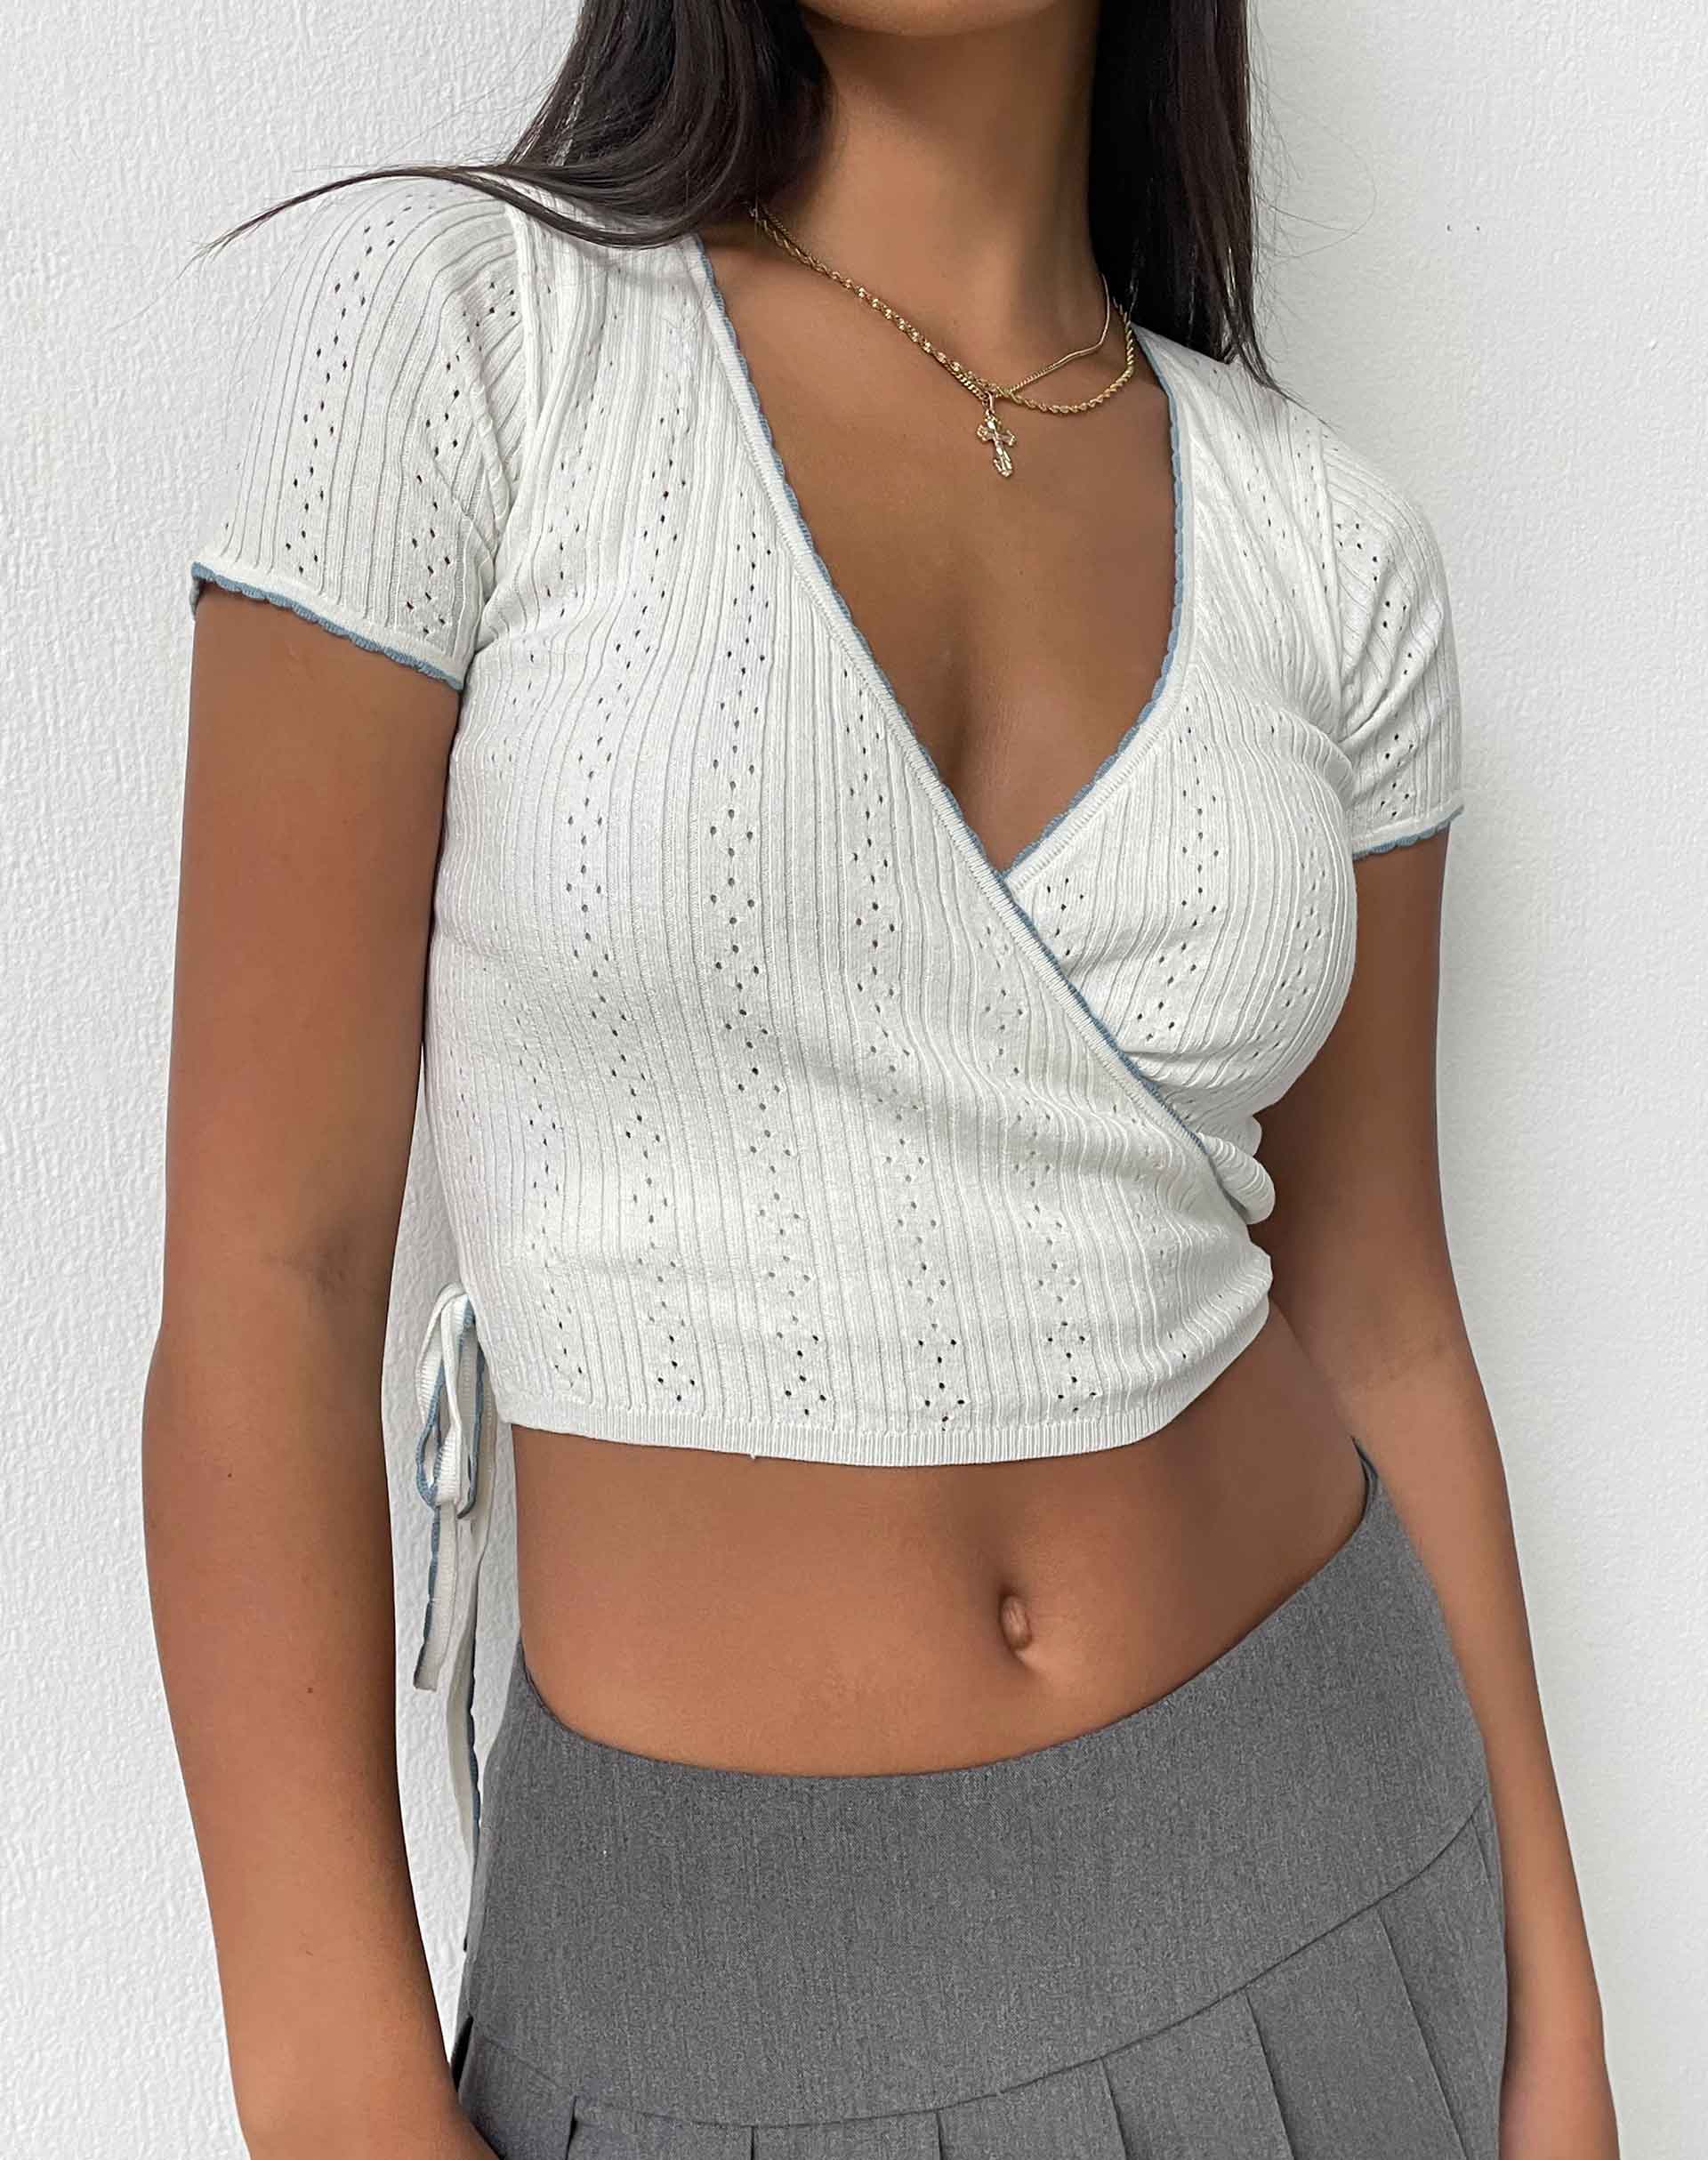 image of Delilah Wrap Top in White Pointelle Knit